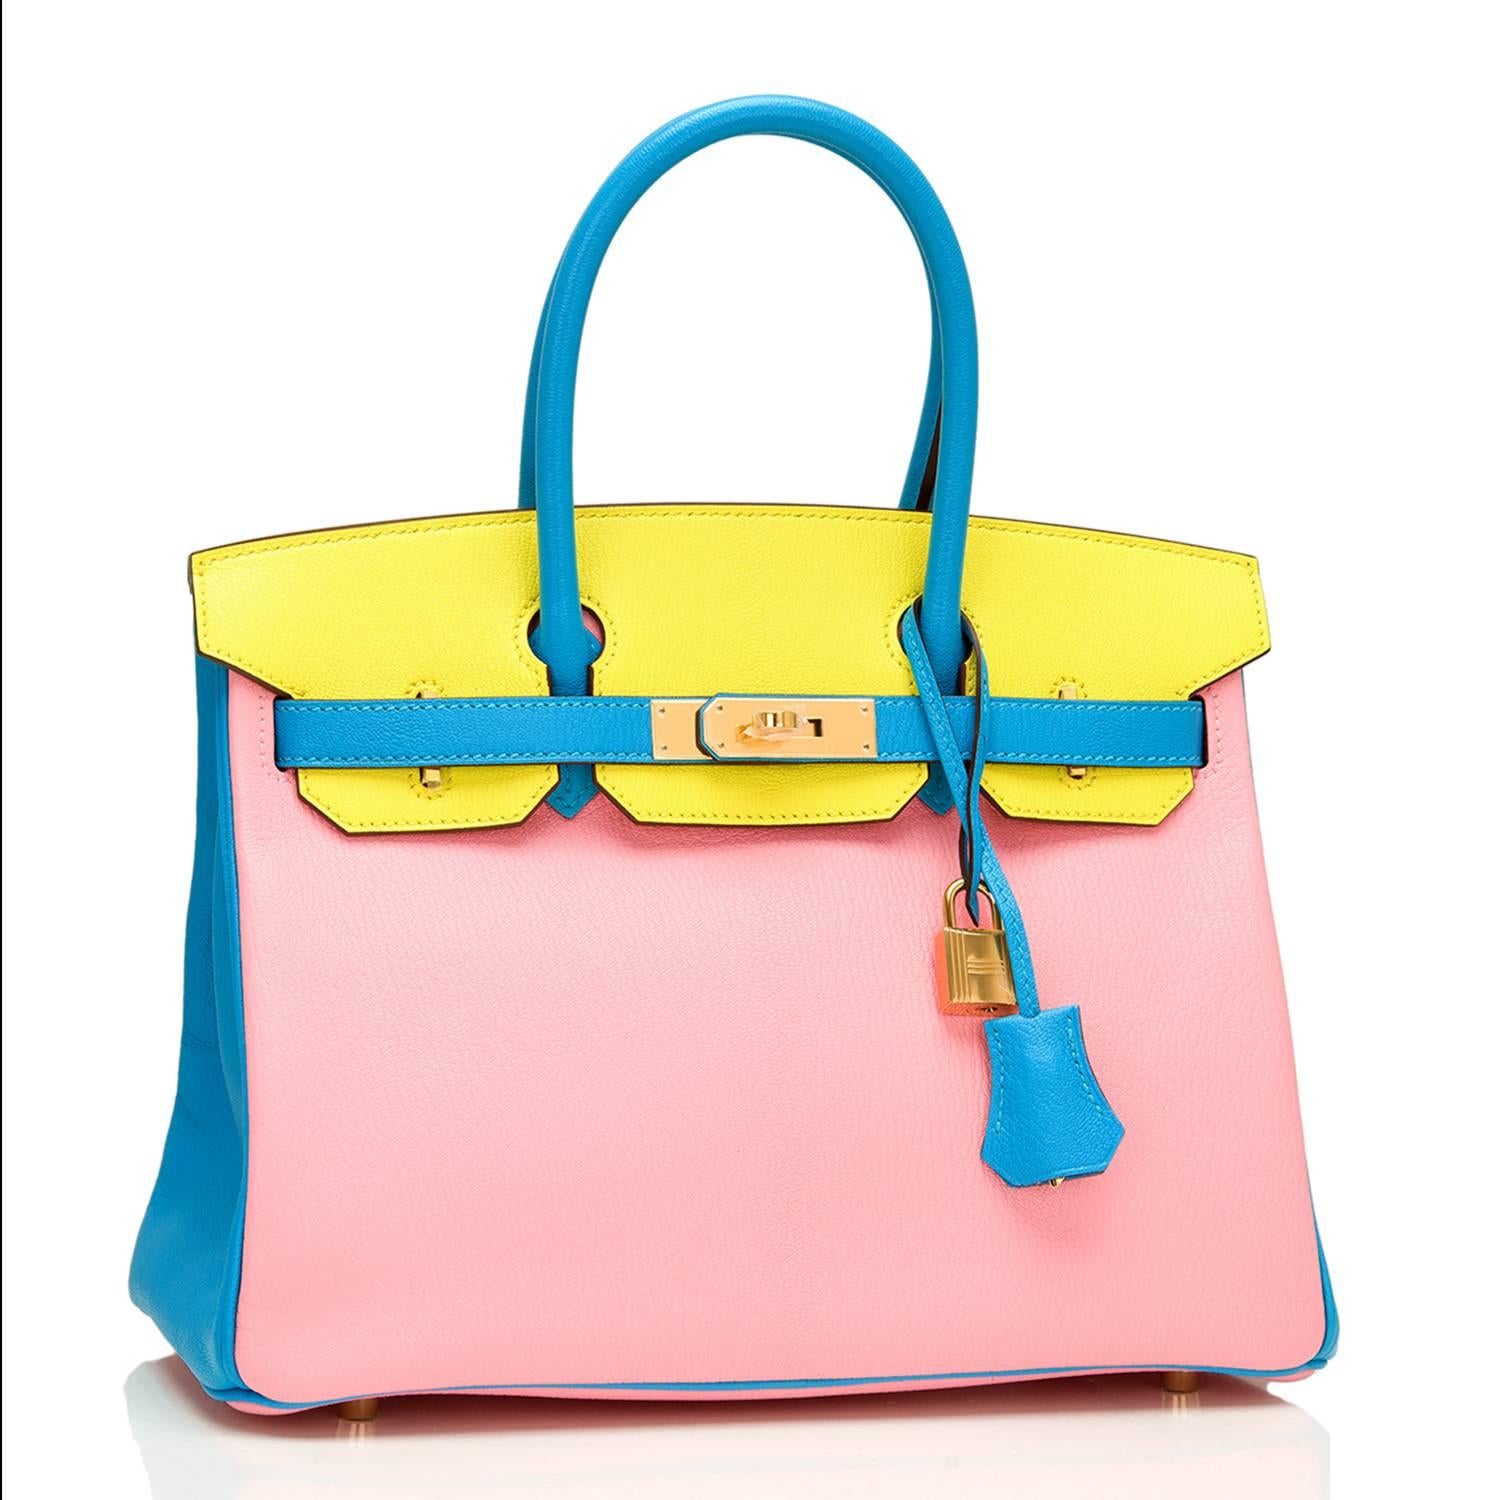 Hermes Horseshoe Stamped Birkin 30cm of Rose Confetti, Soufre, and Blue Aztec in chevre leather with gold hardware.

This Special Order Birkin with Rose Confetti front and bottom, Soufre back and front flap and Blue Aztec sides, handles, straps has